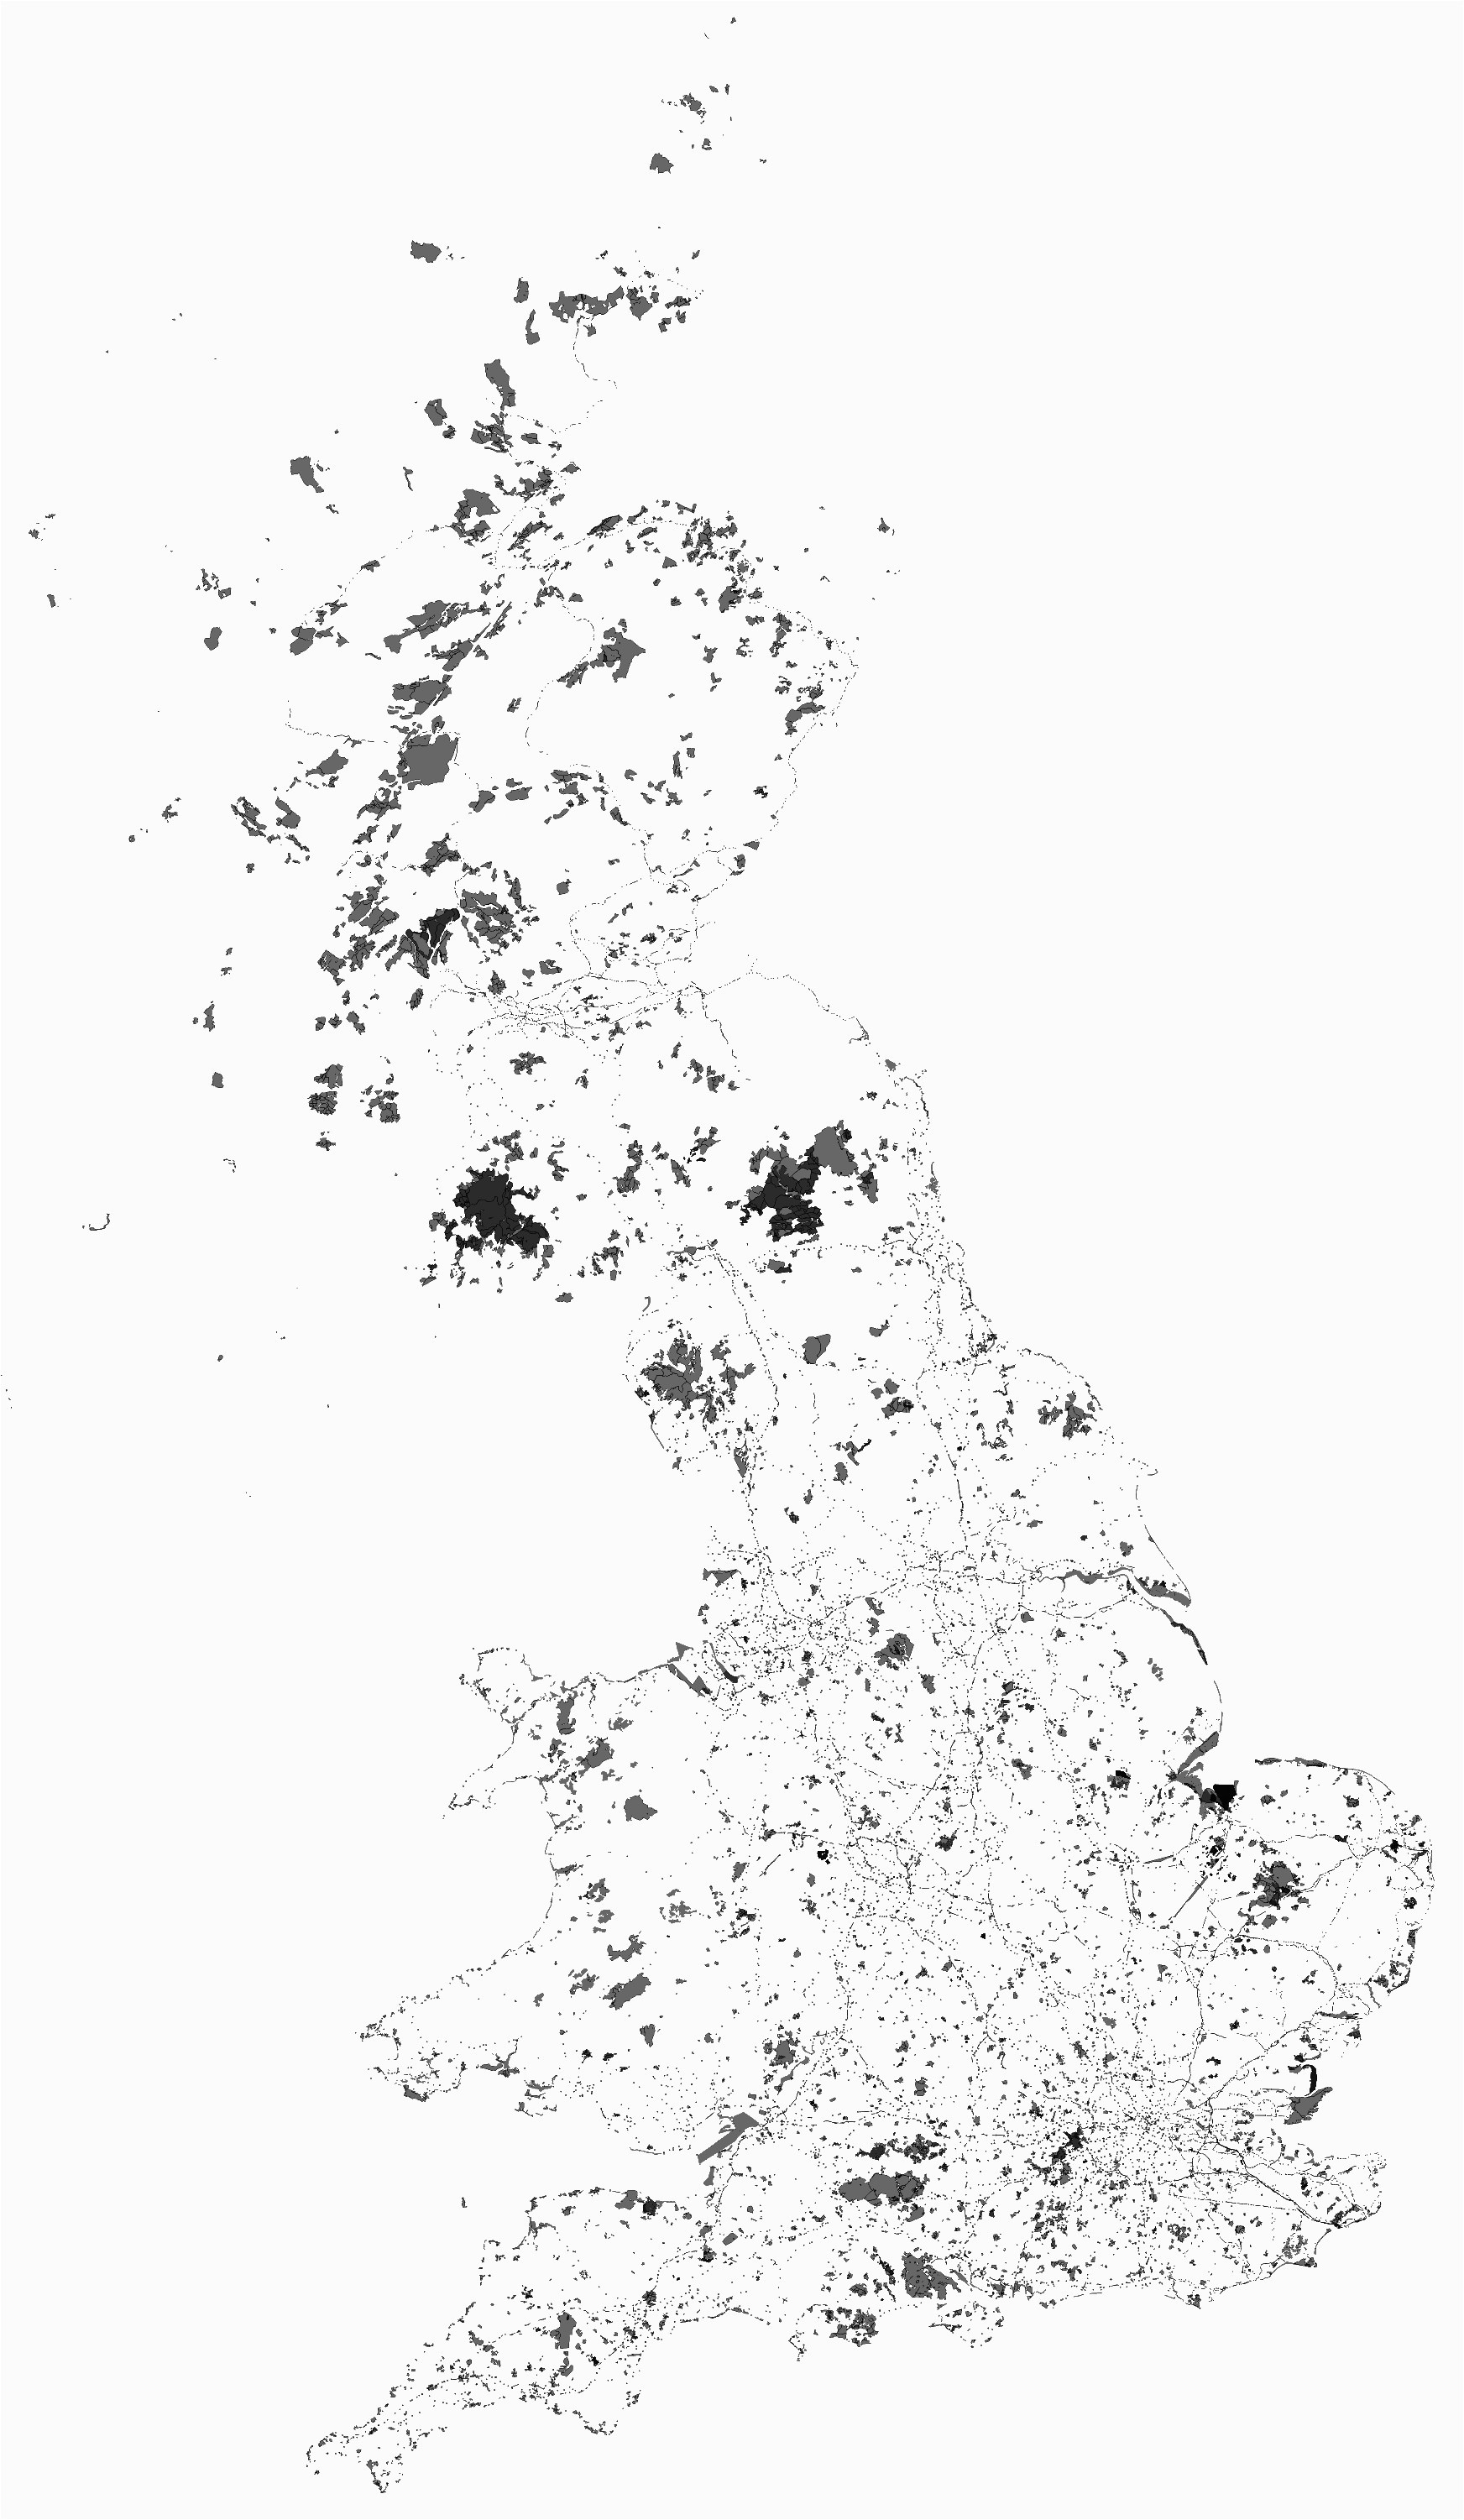 who owns england land ownership map